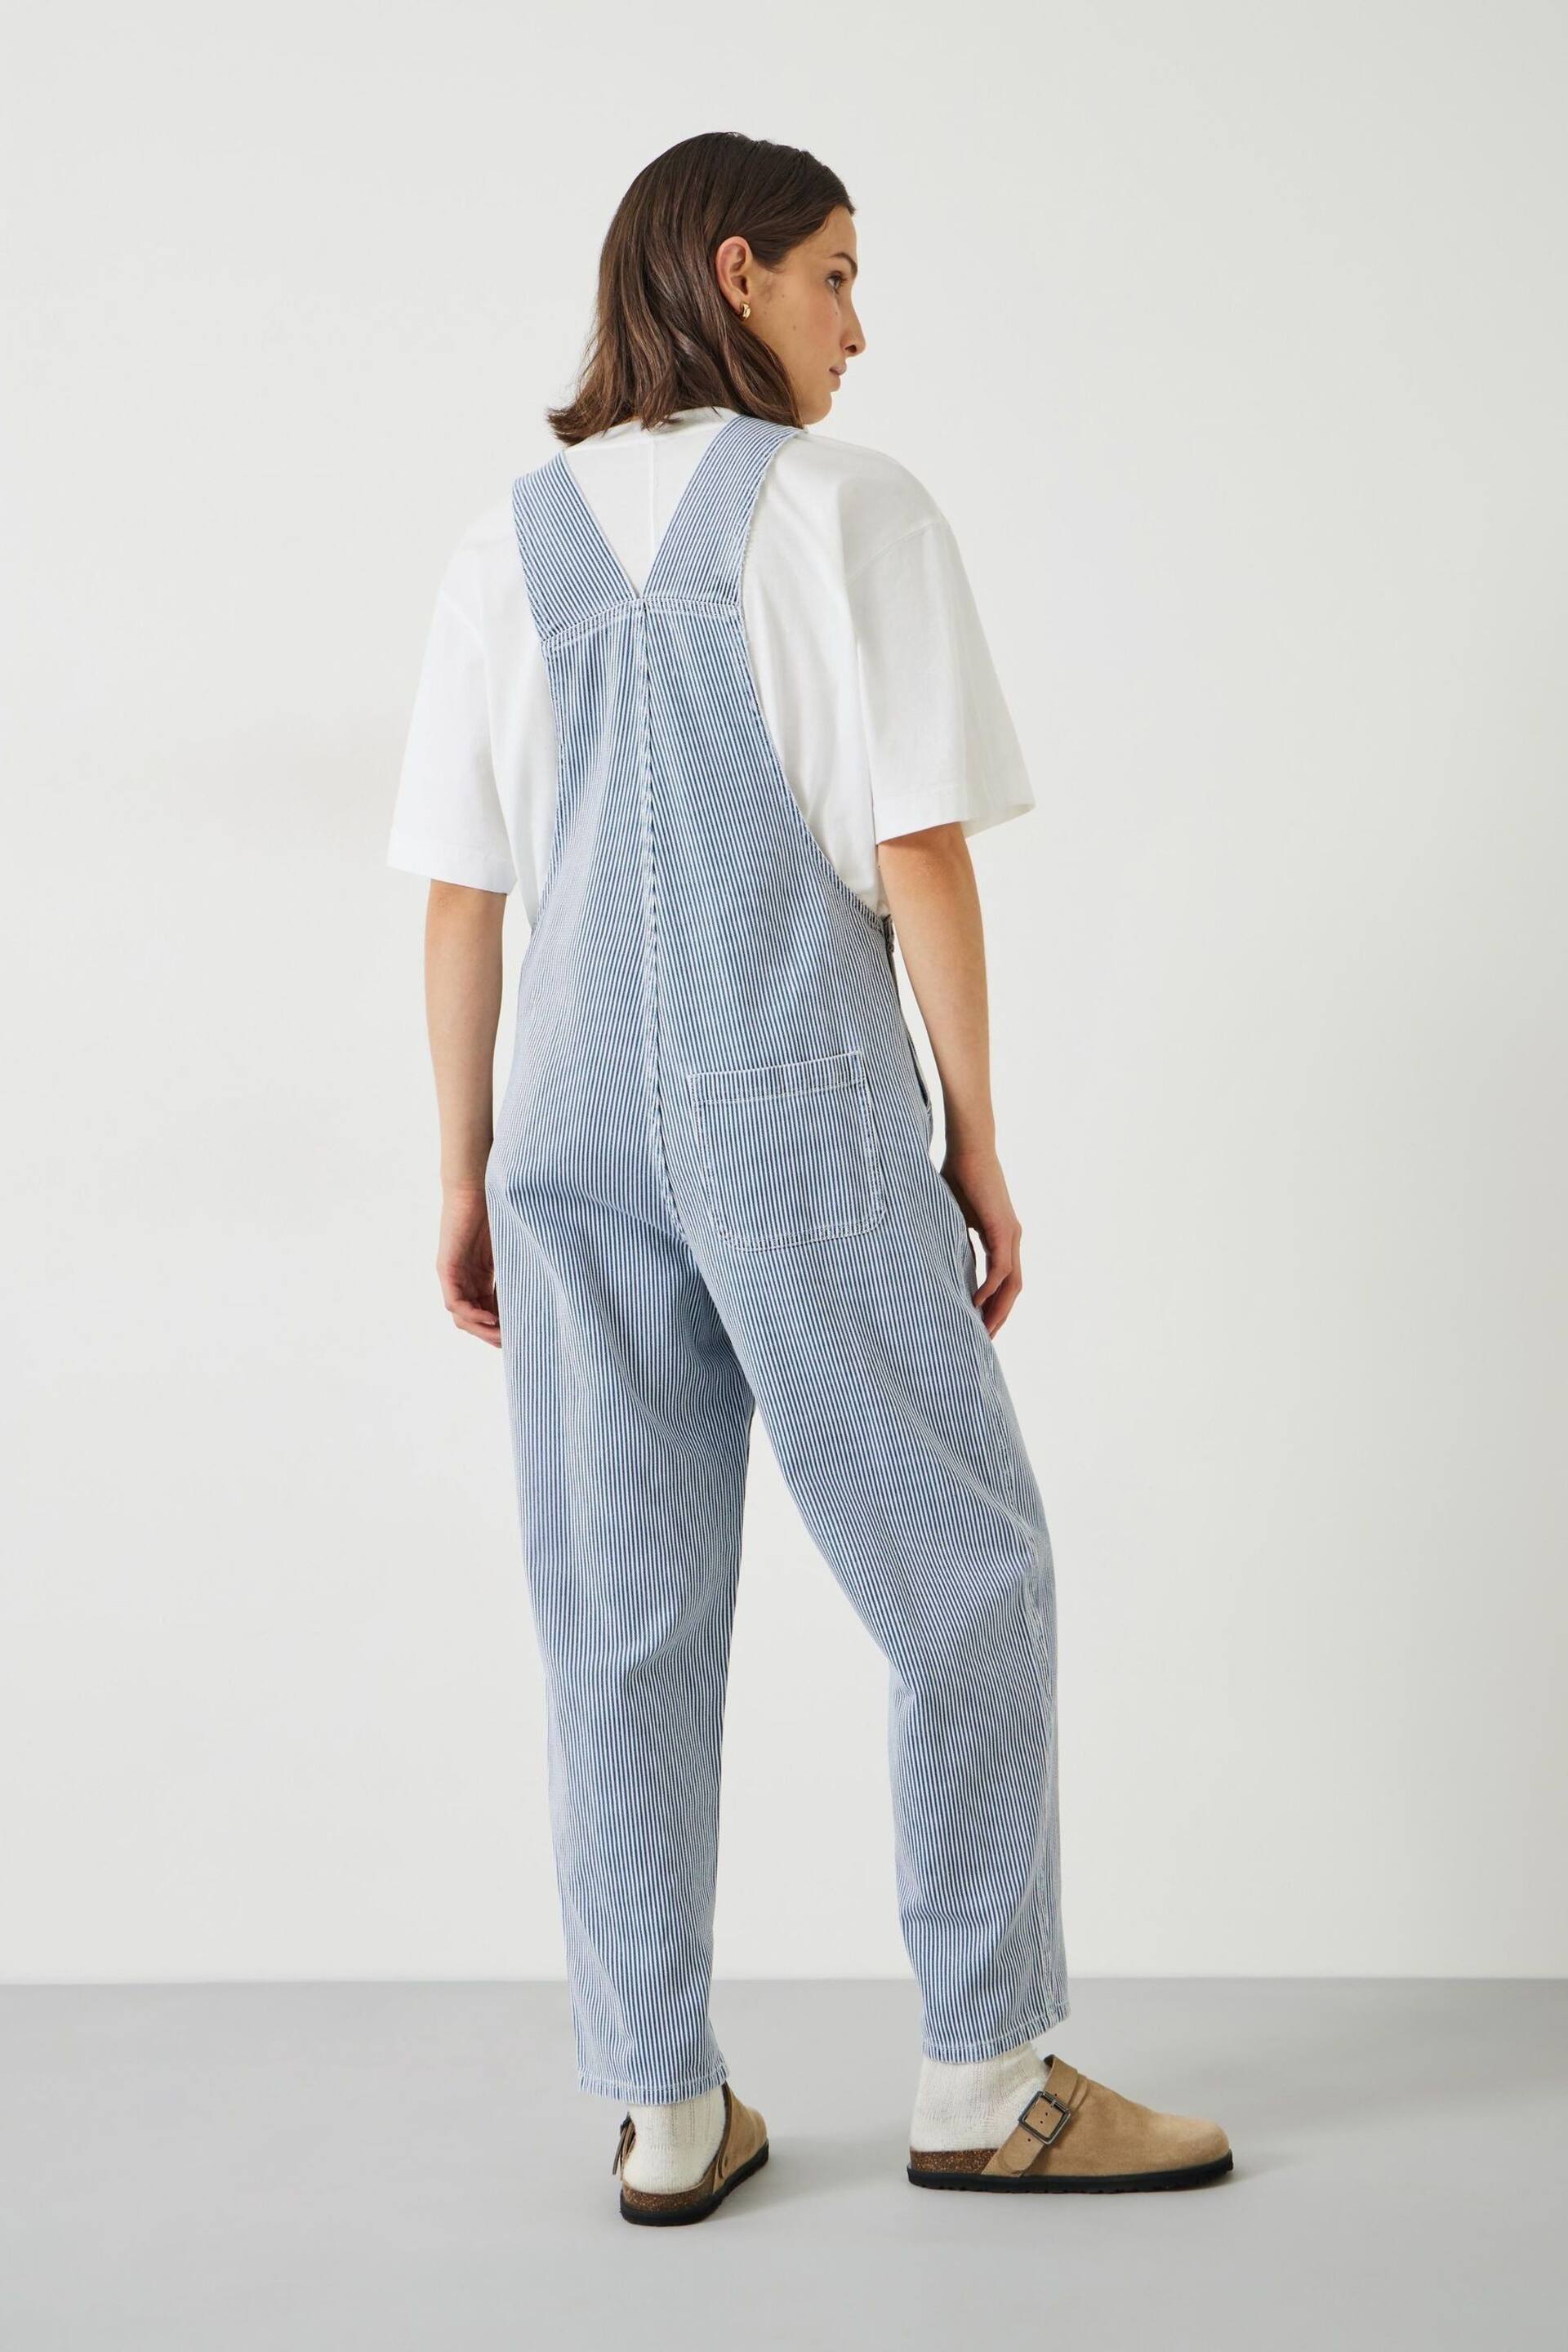 Hush Blue Wilder Striped Dungarees - Image 3 of 5